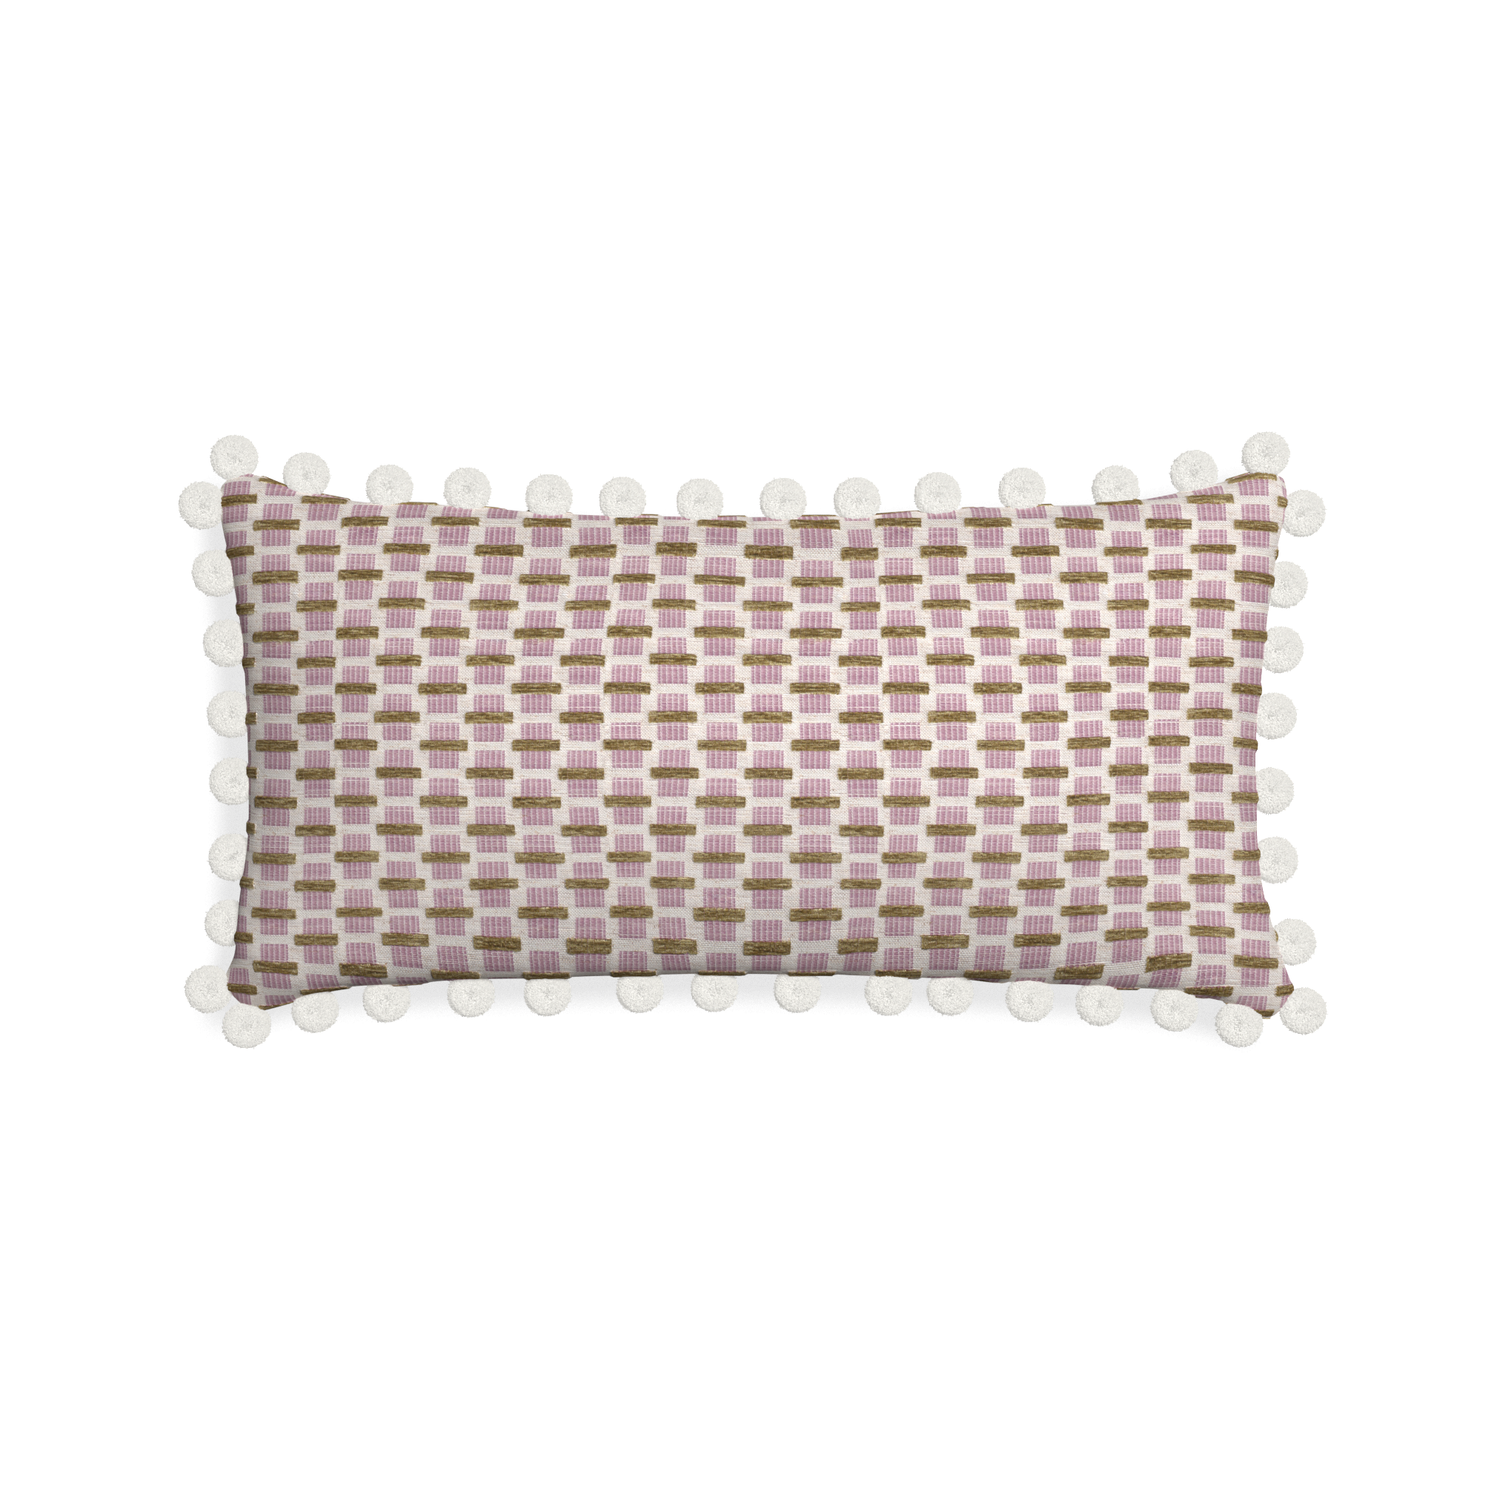 Midi-lumbar willow orchid custom pink geometric chenillepillow with snow pom pom on white background